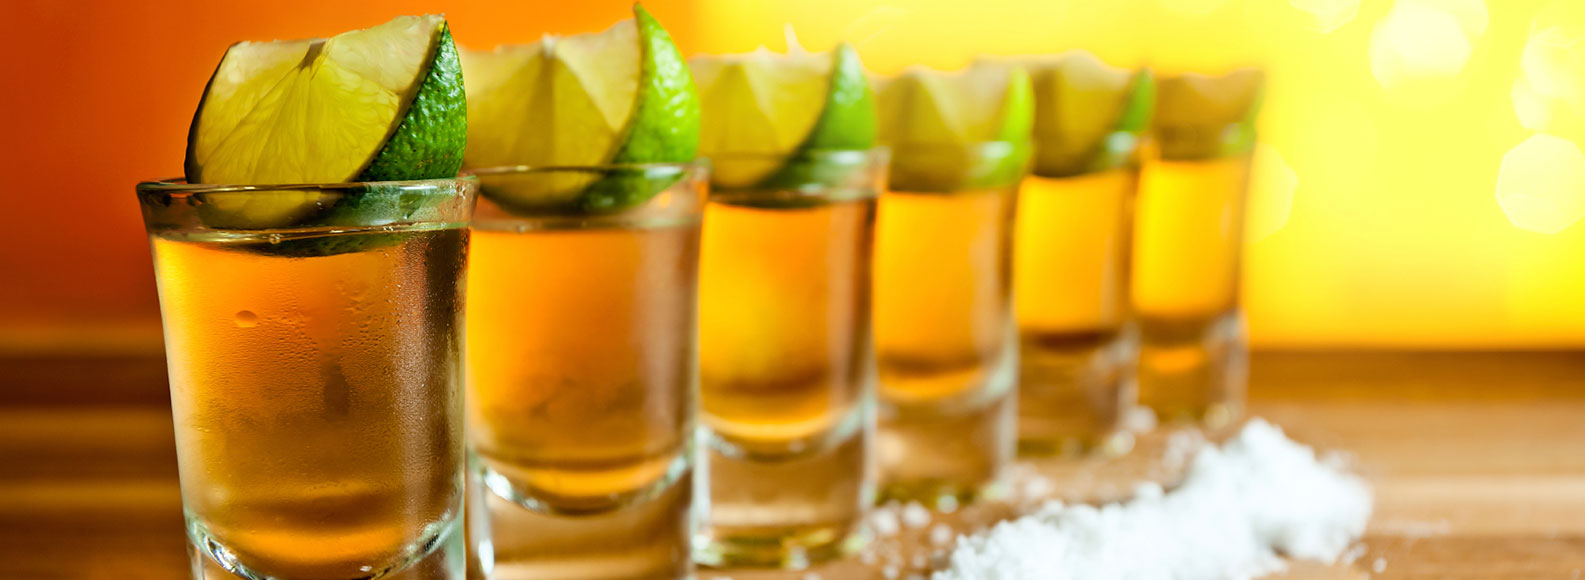 tequila-tasting-large